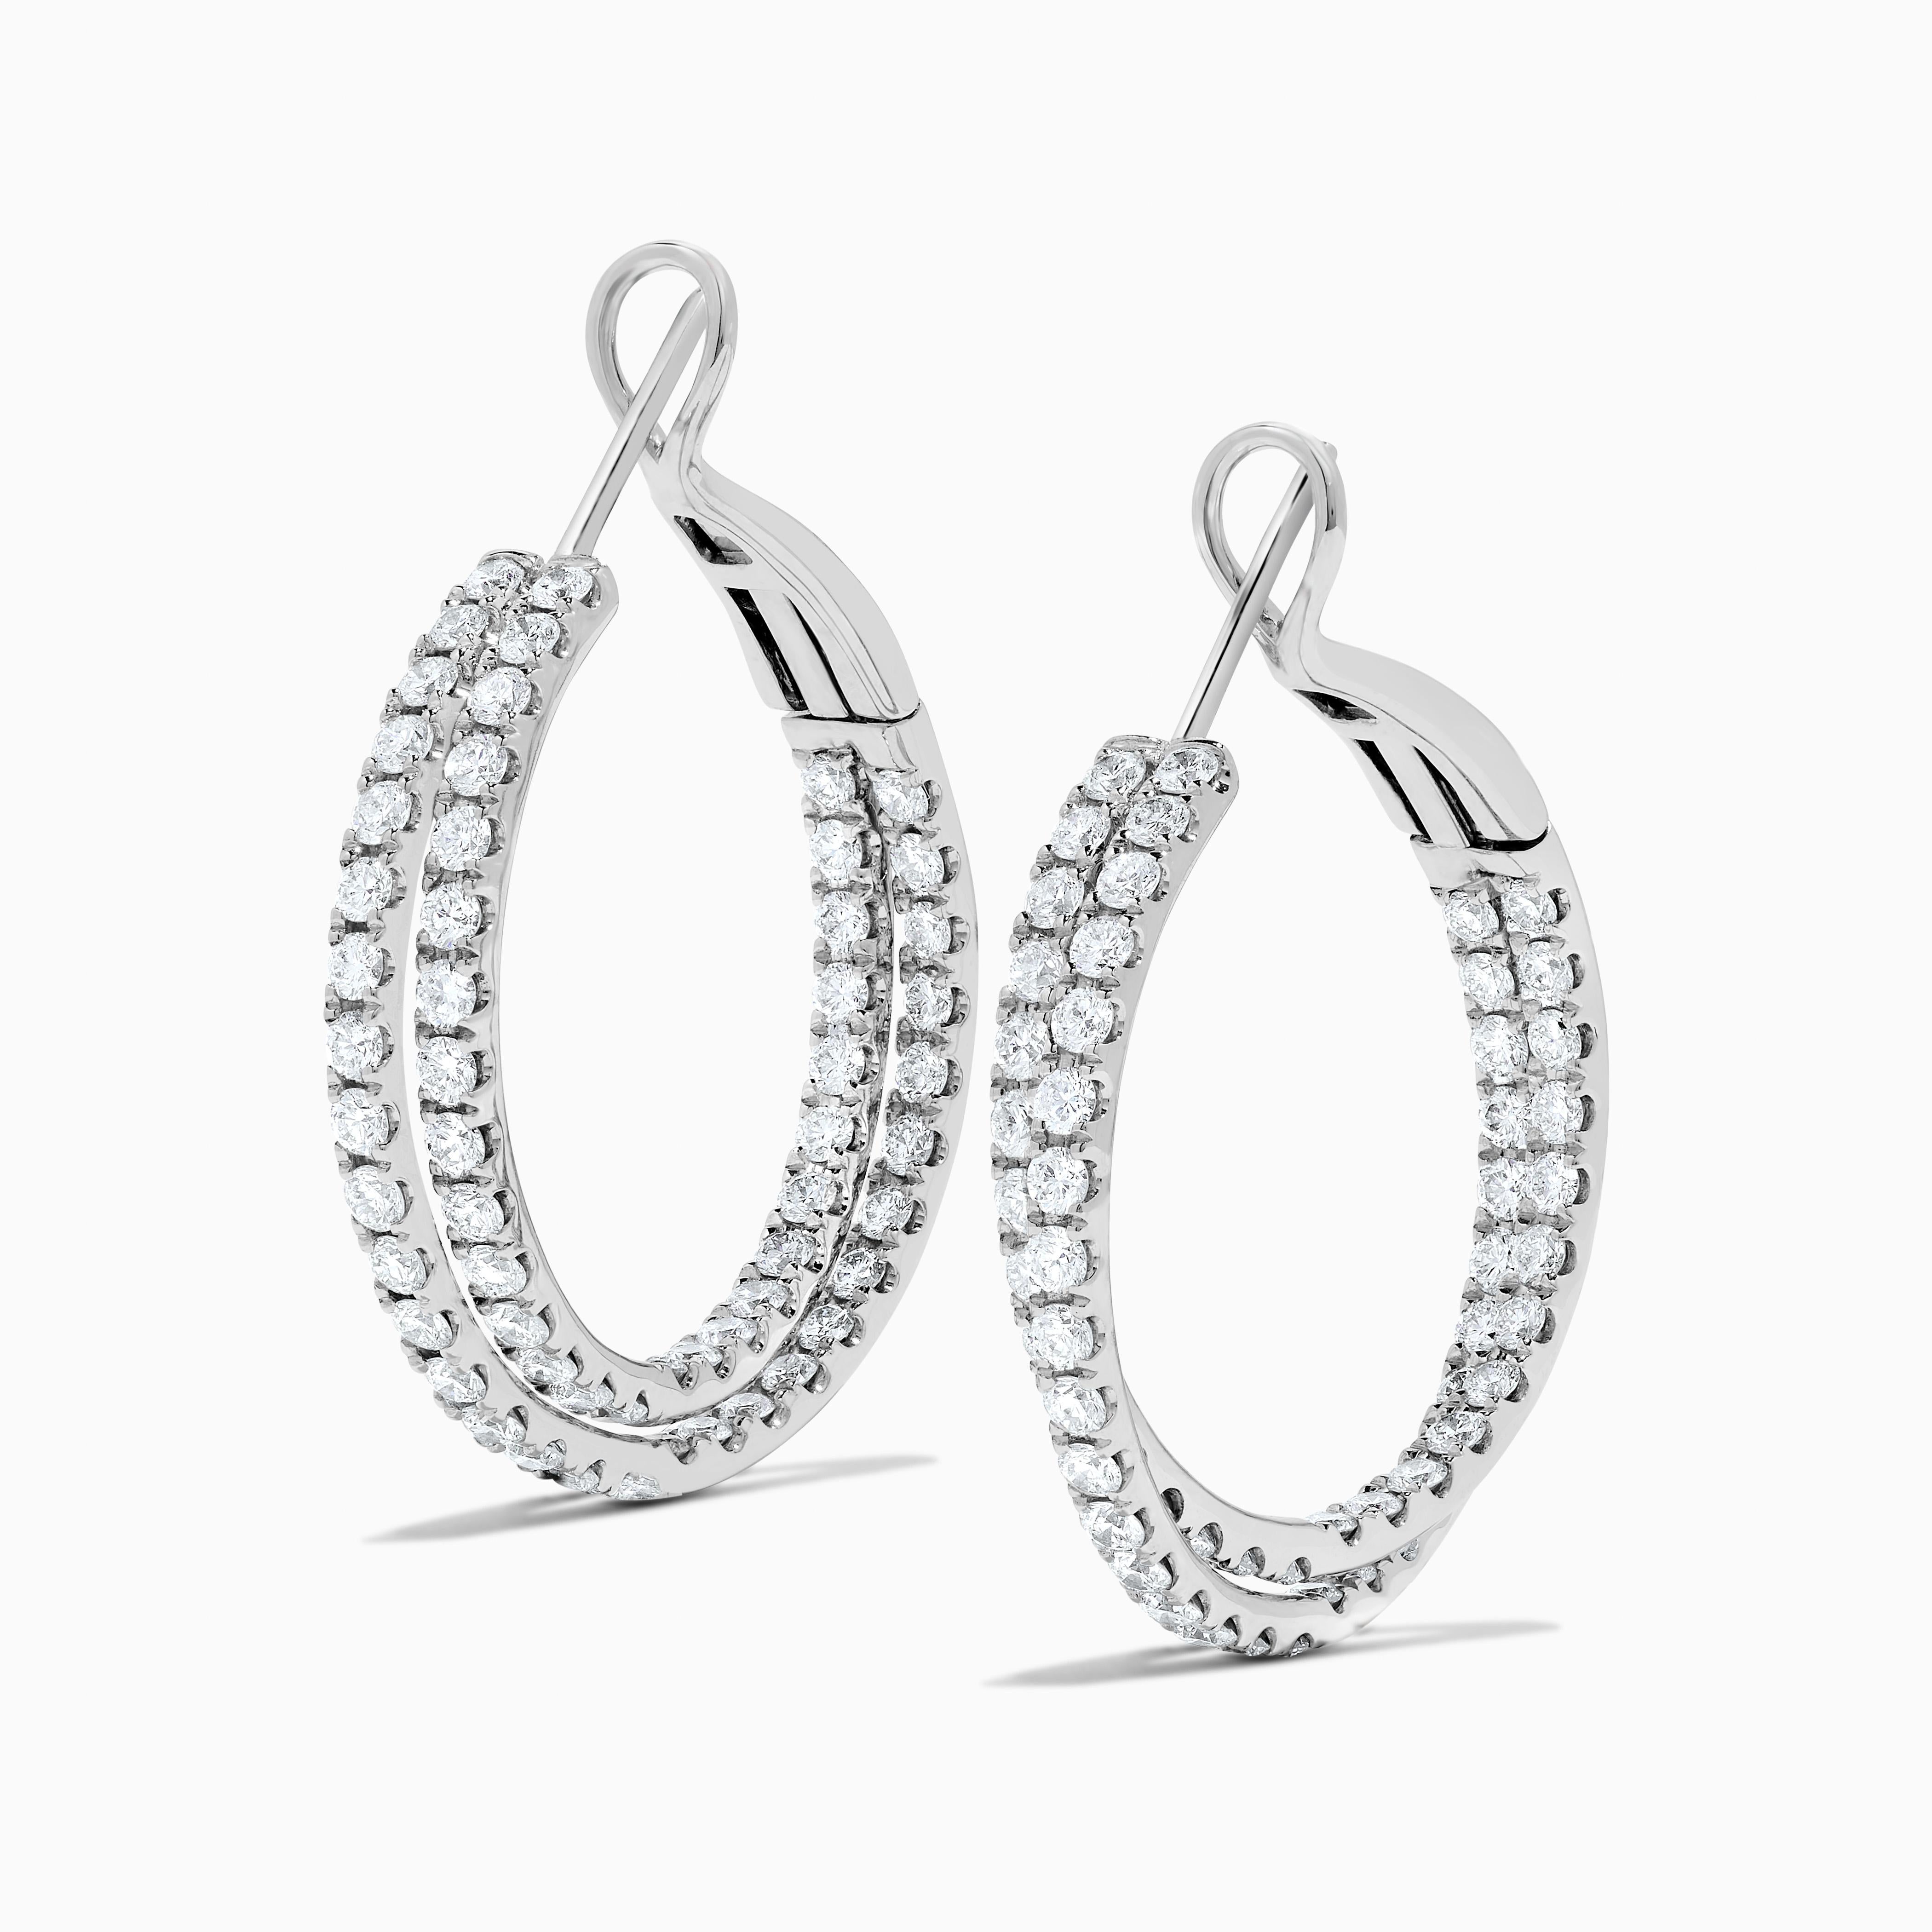 Contemporary Natural White Round Diamond 2.62 Carat TW White Gold Hoop Earrings For Sale